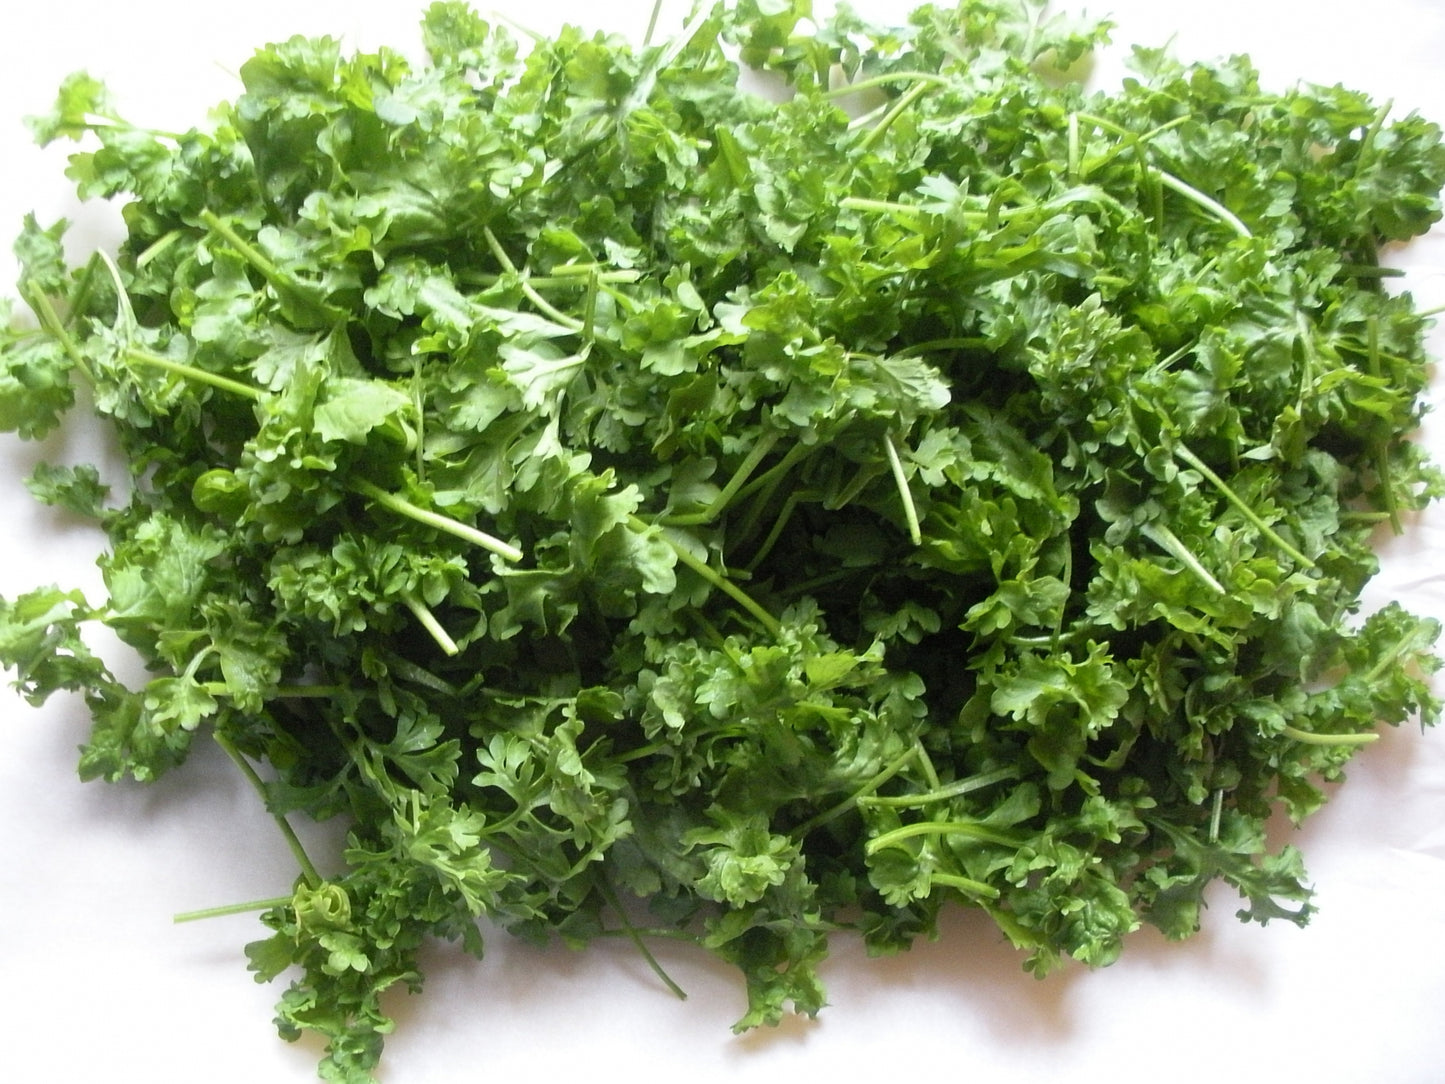 Curled Cress Herb, 500 Heirloom Seeds Per Packet, Non GMO Seeds